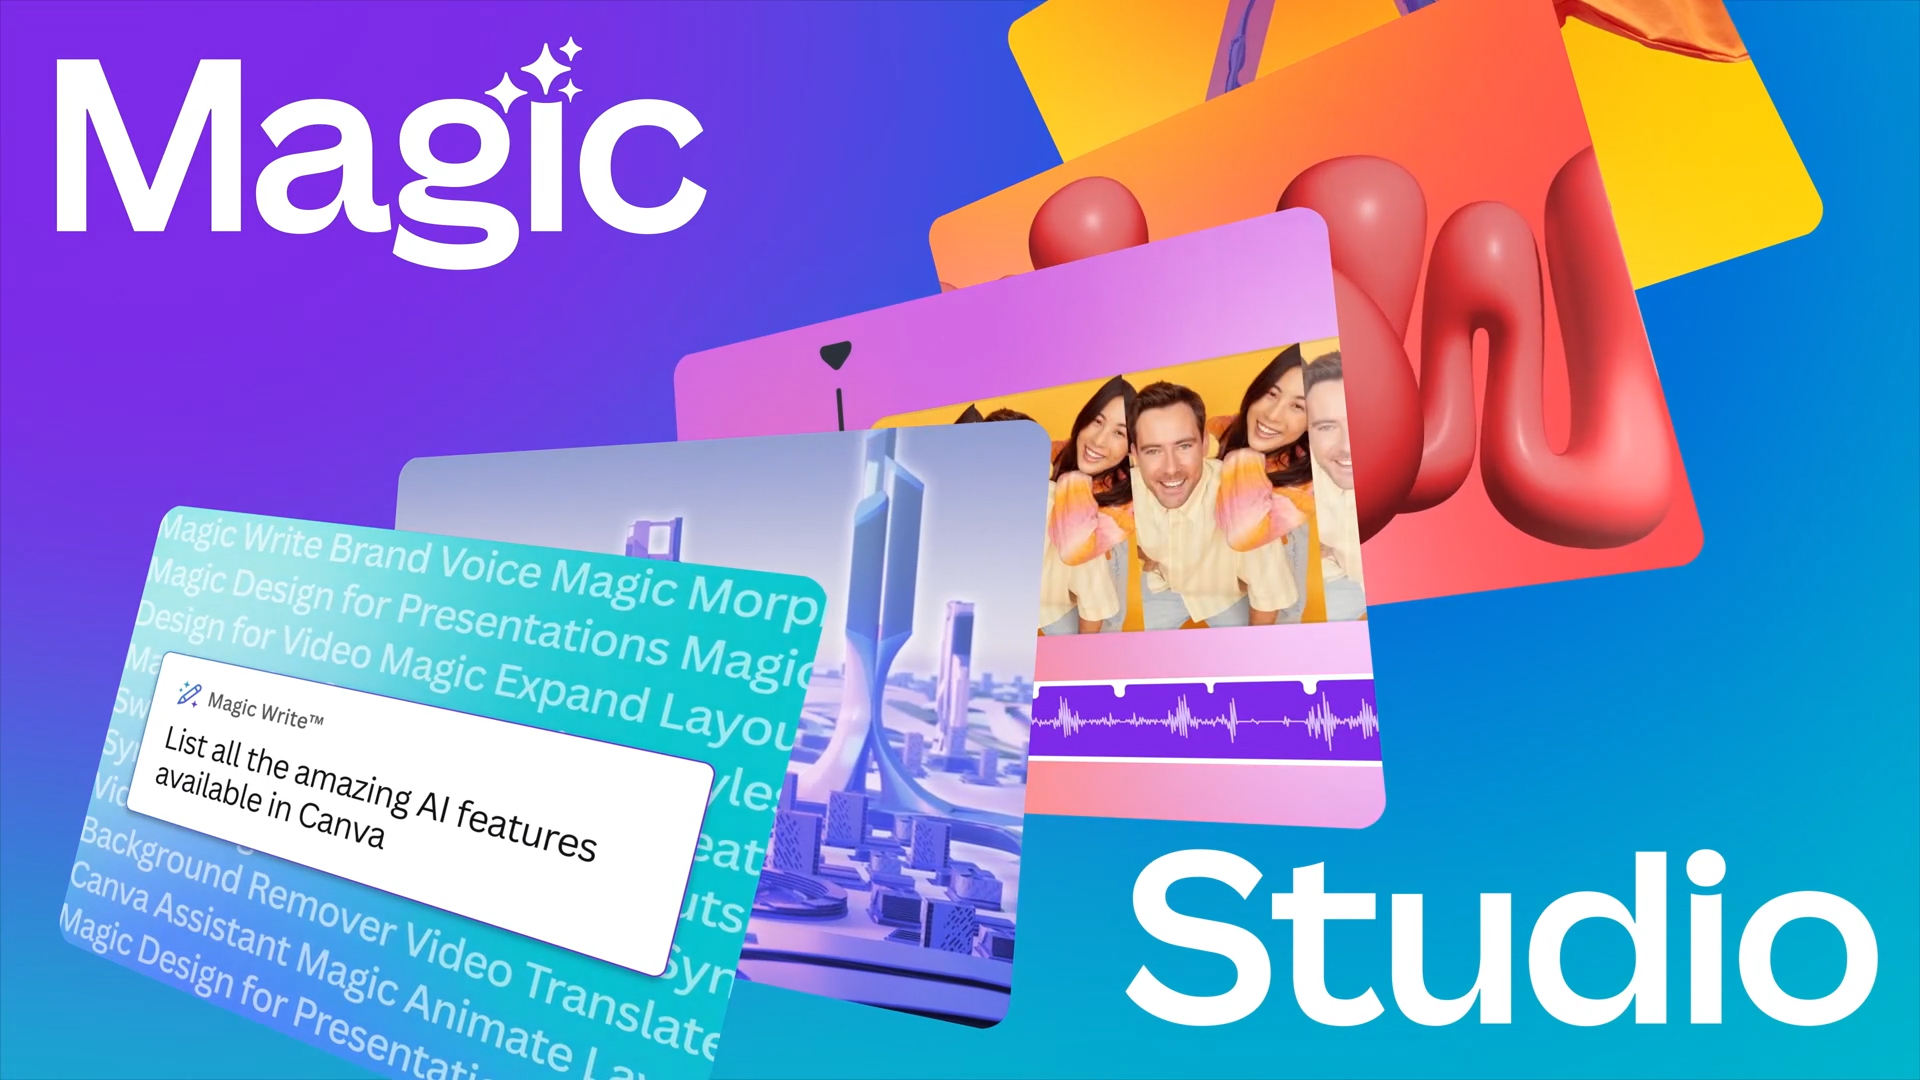 Reinforcing Canva’s mission to democratize design, Magic Studio is the world’s most comprehensive AI-design platform empowering individuals, teams and organizations to boost their creativity, supercharge their productivity and scale their brands.